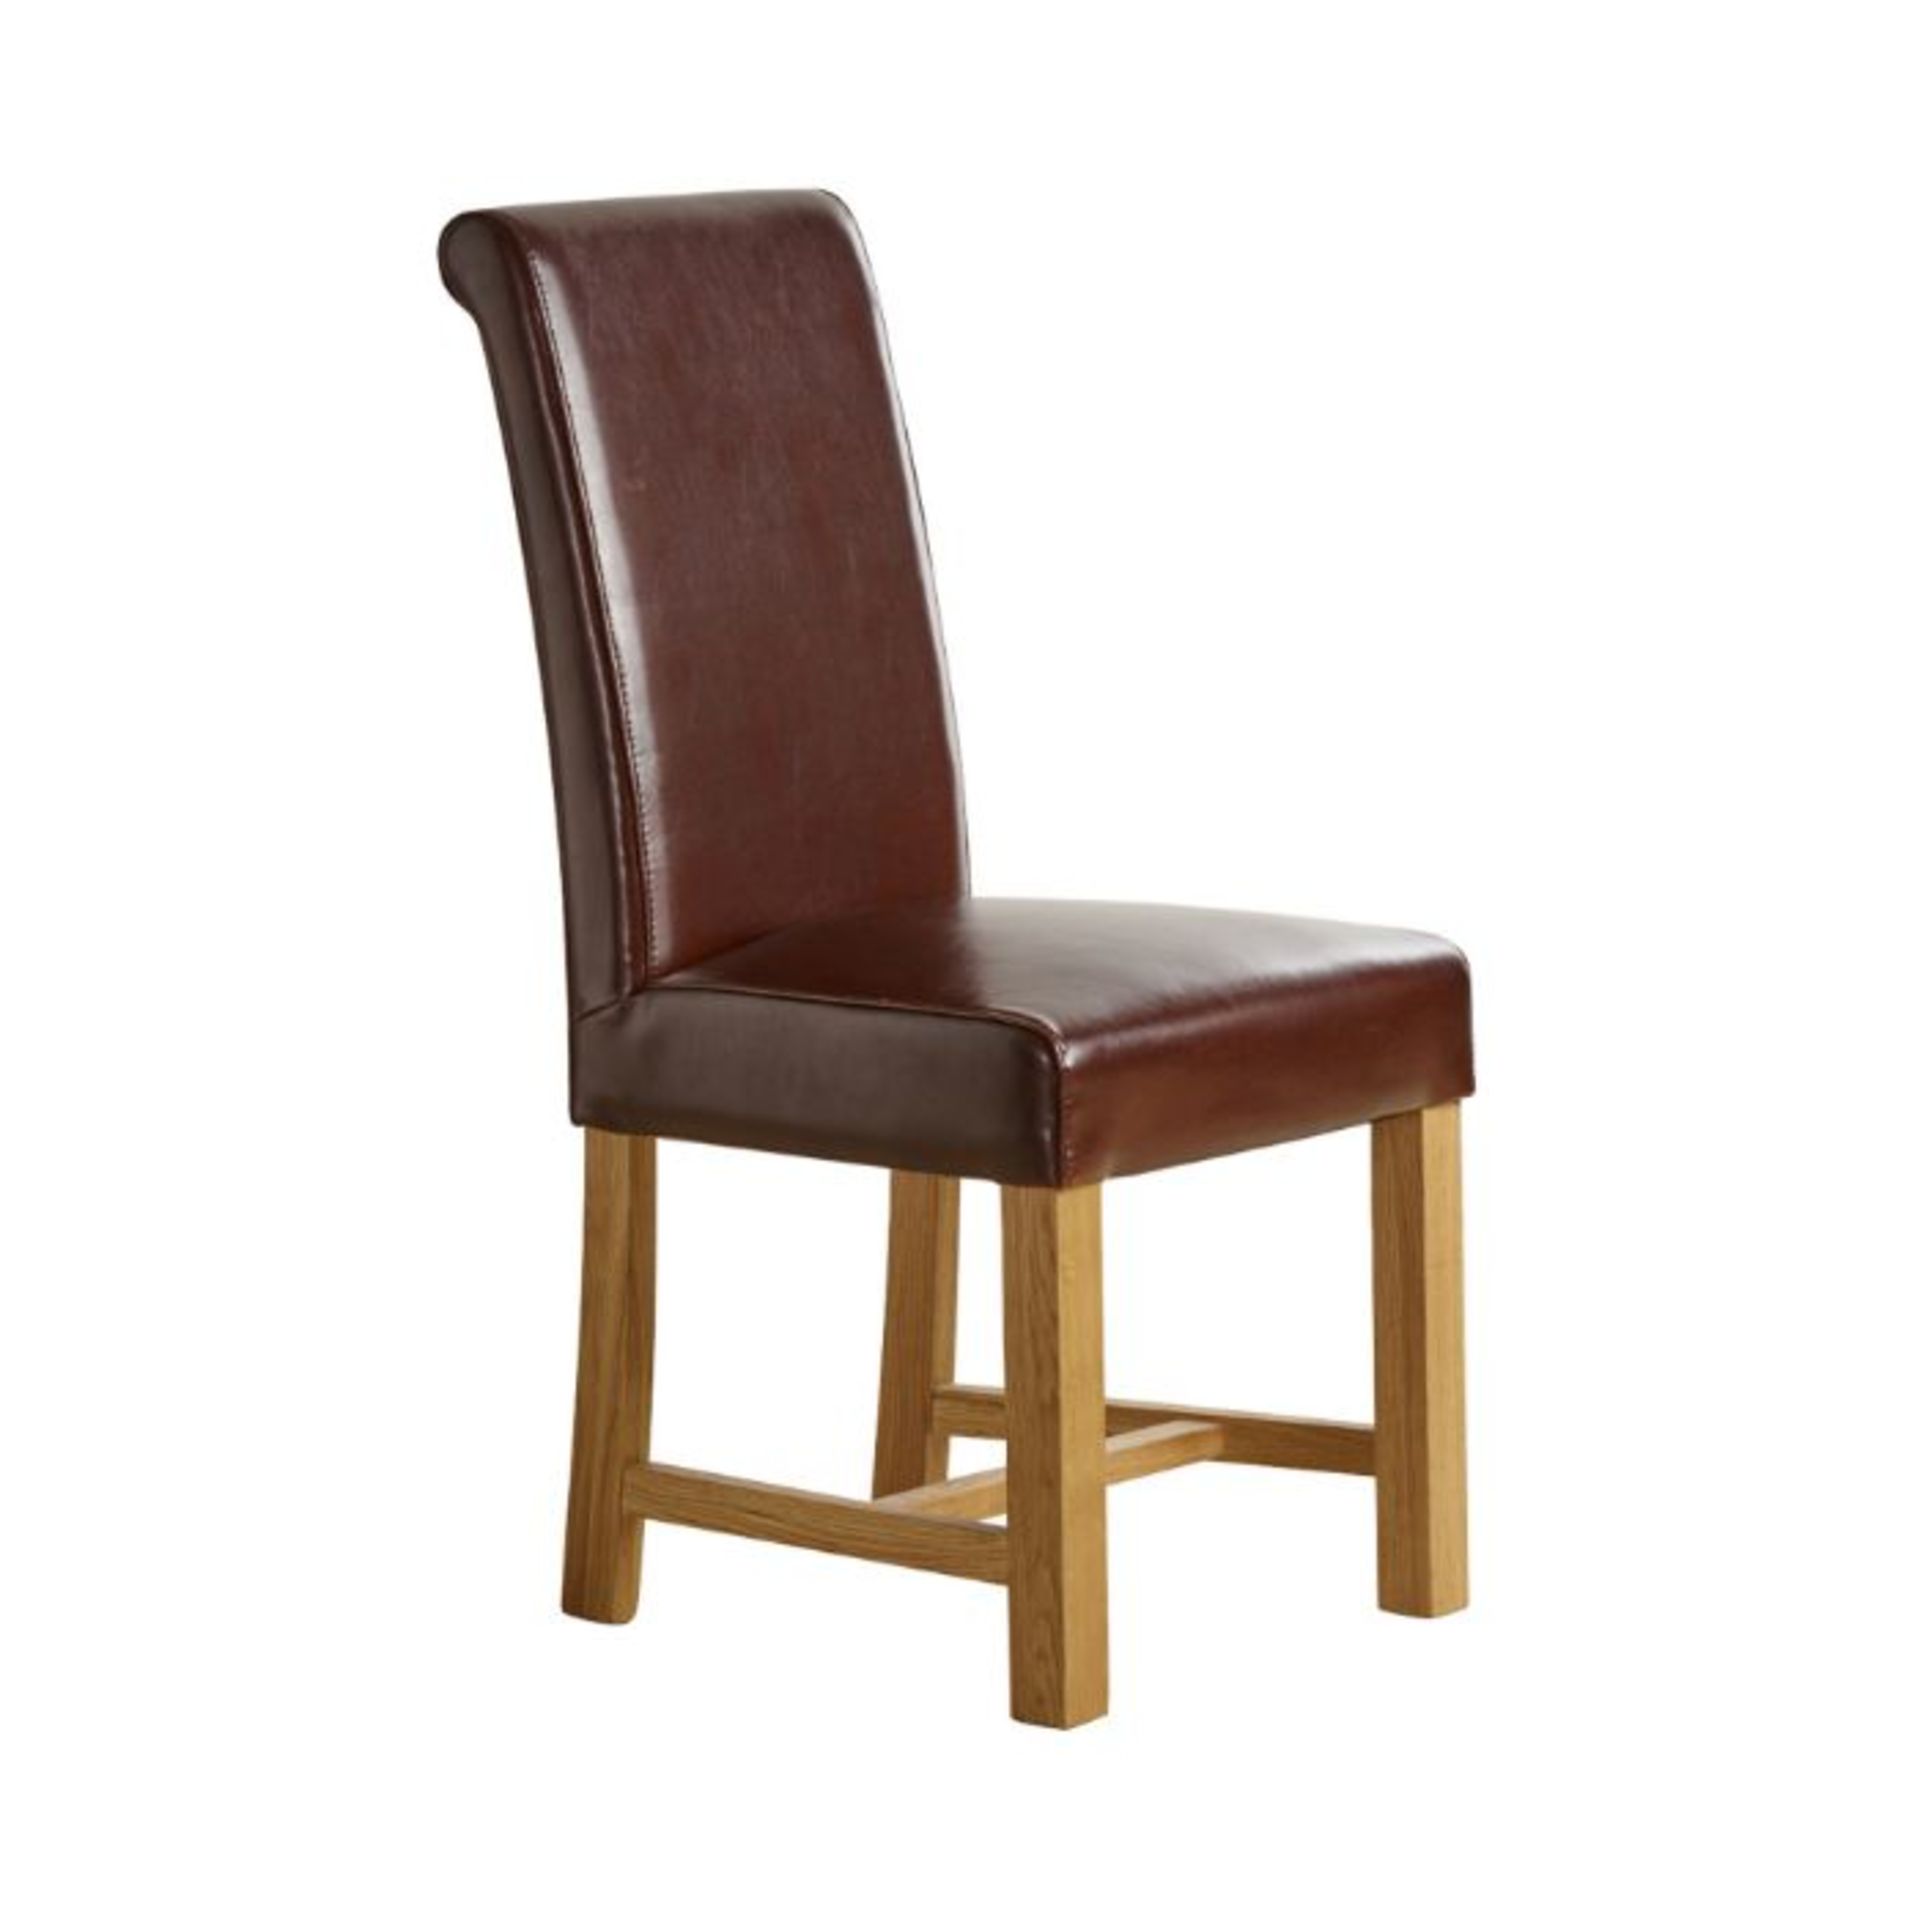 Oak Furnitureland Pair of Braced Scroll Back Chair in Brown Bicast Leather with Solid Oak Legs